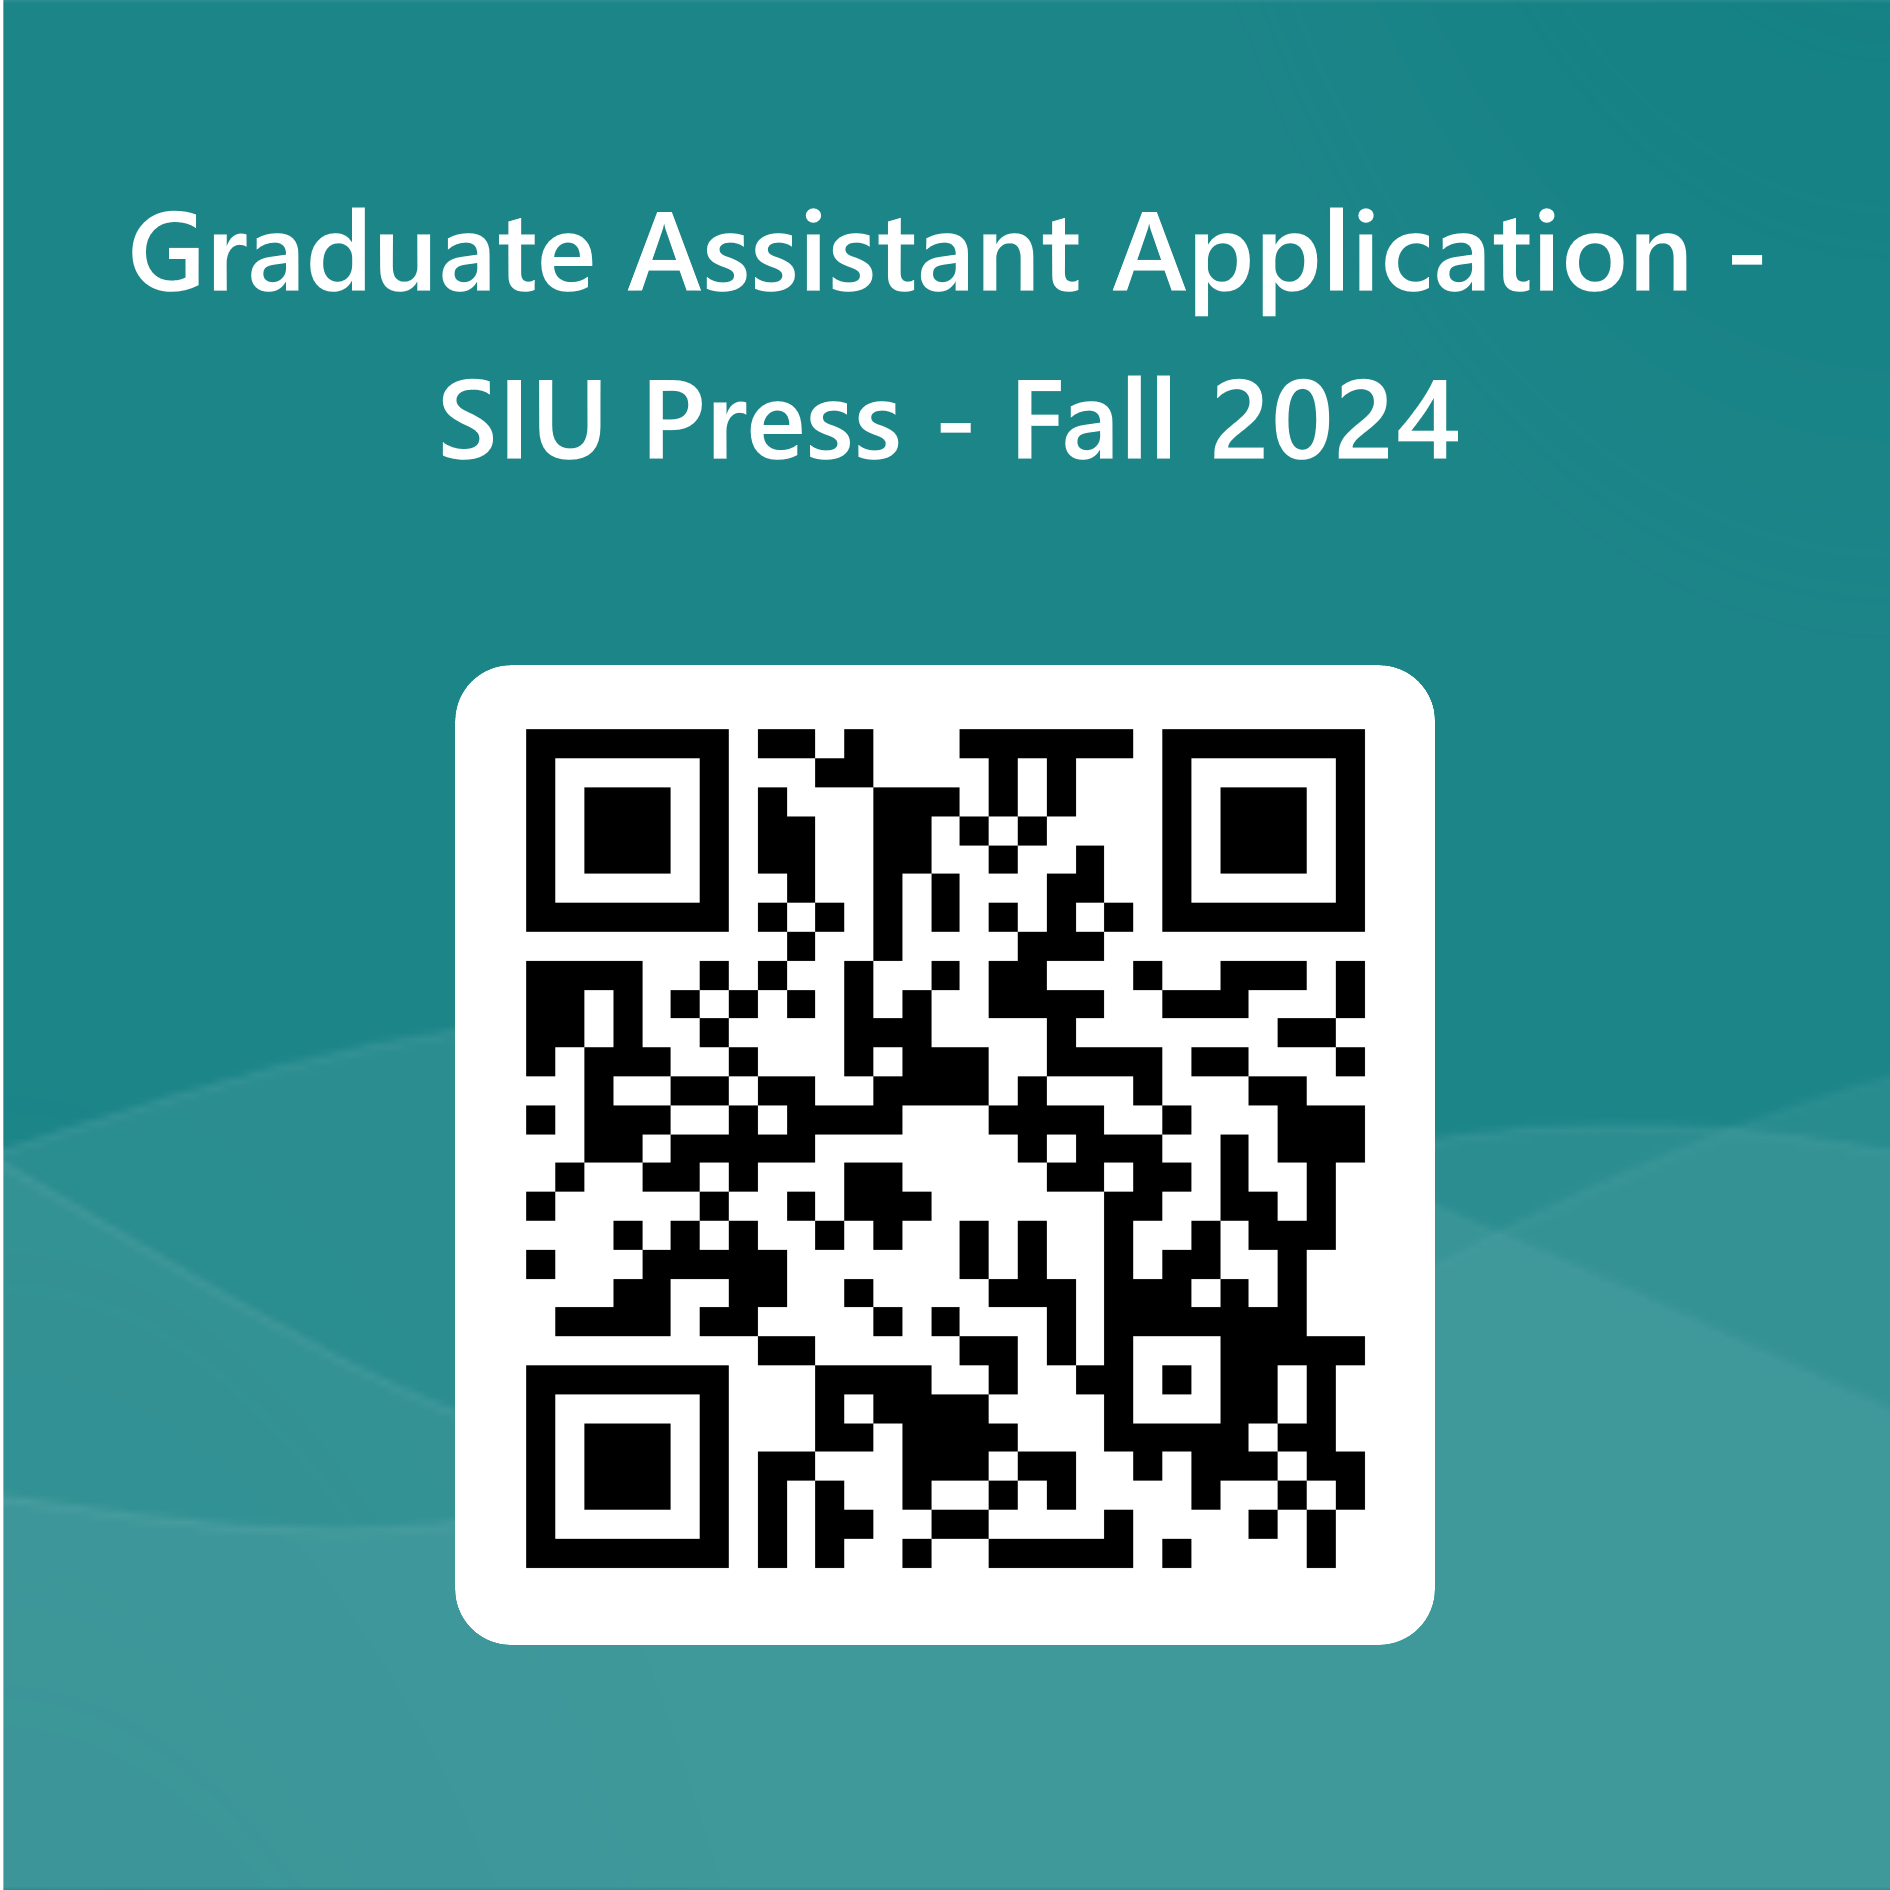 qr code linking to the online application form for the SIU Press Fall 2024 Graduate Assistantship